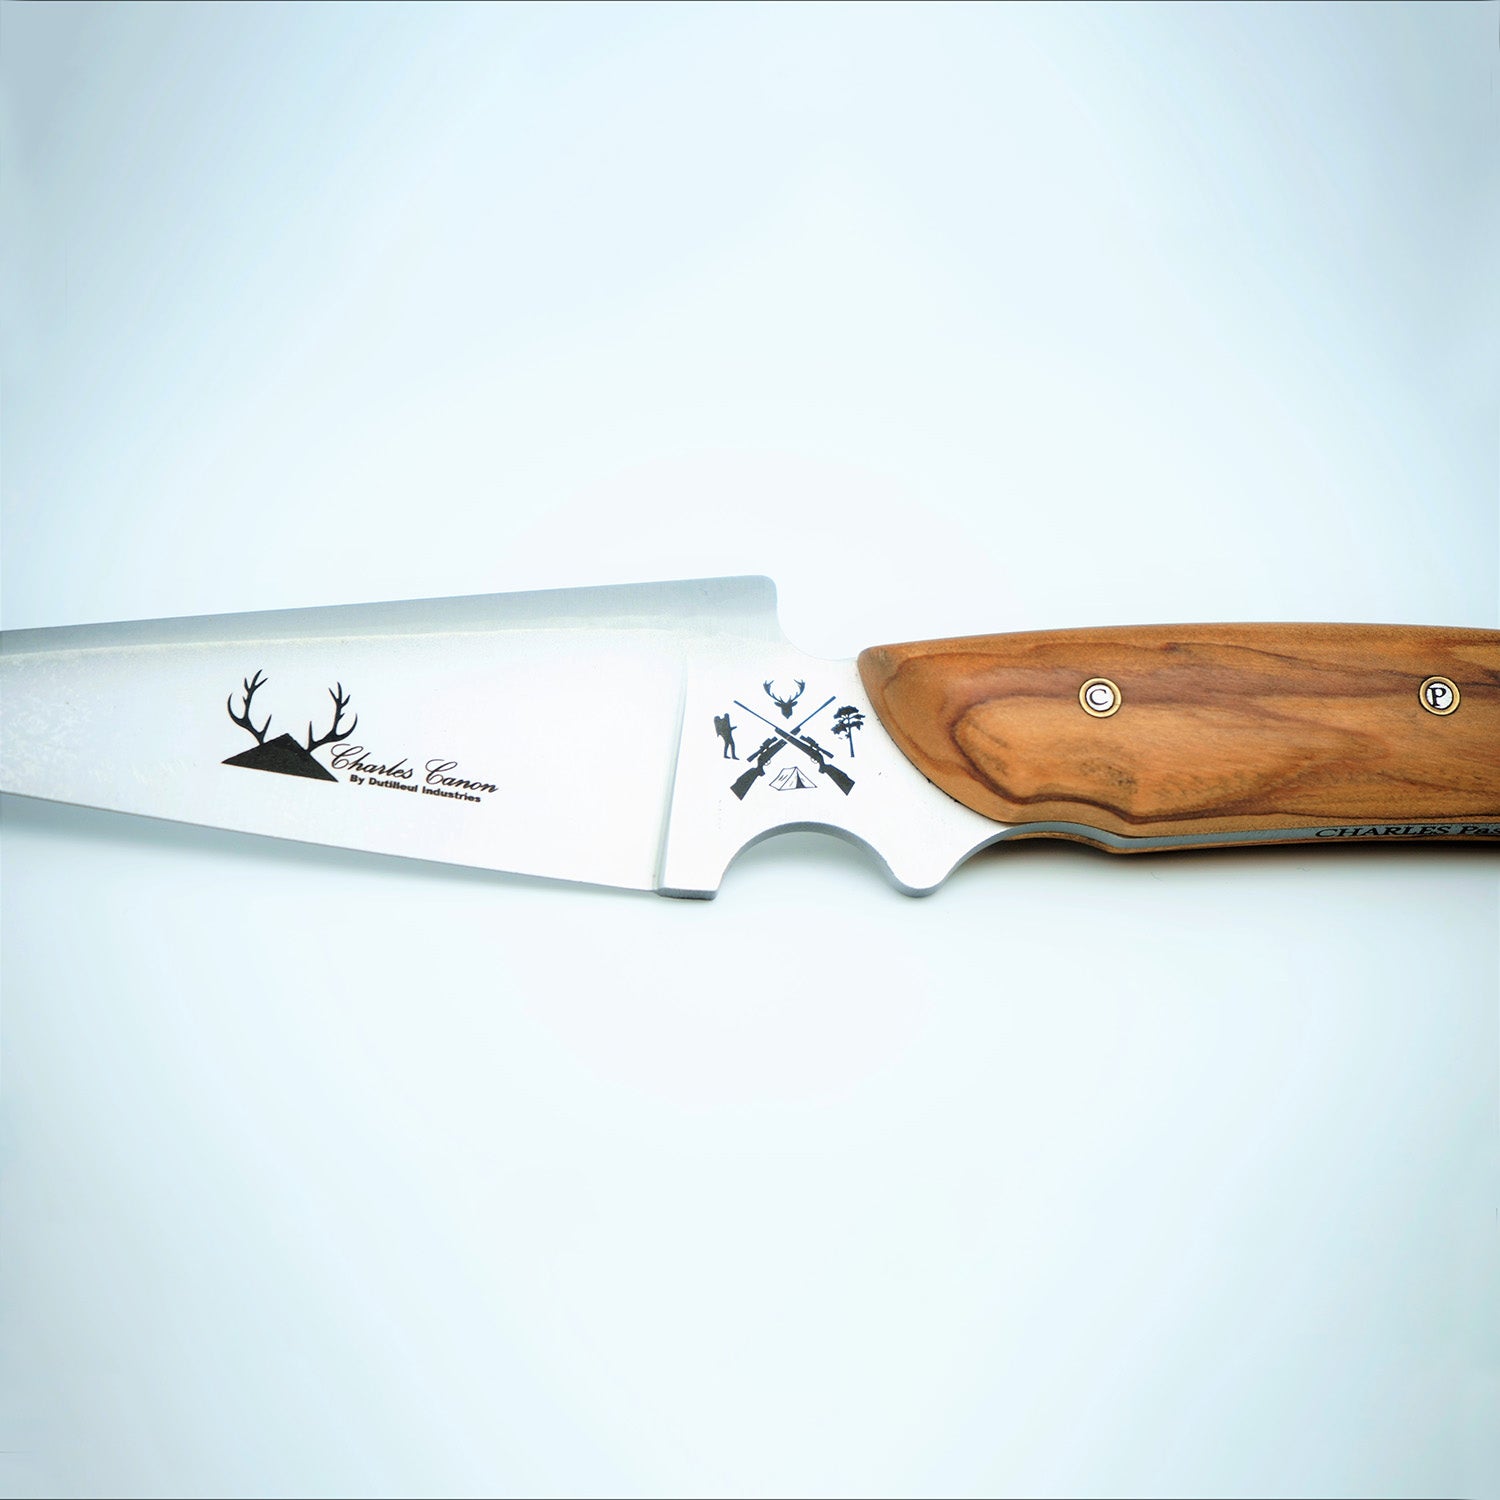 Hunting knife with its olive handle